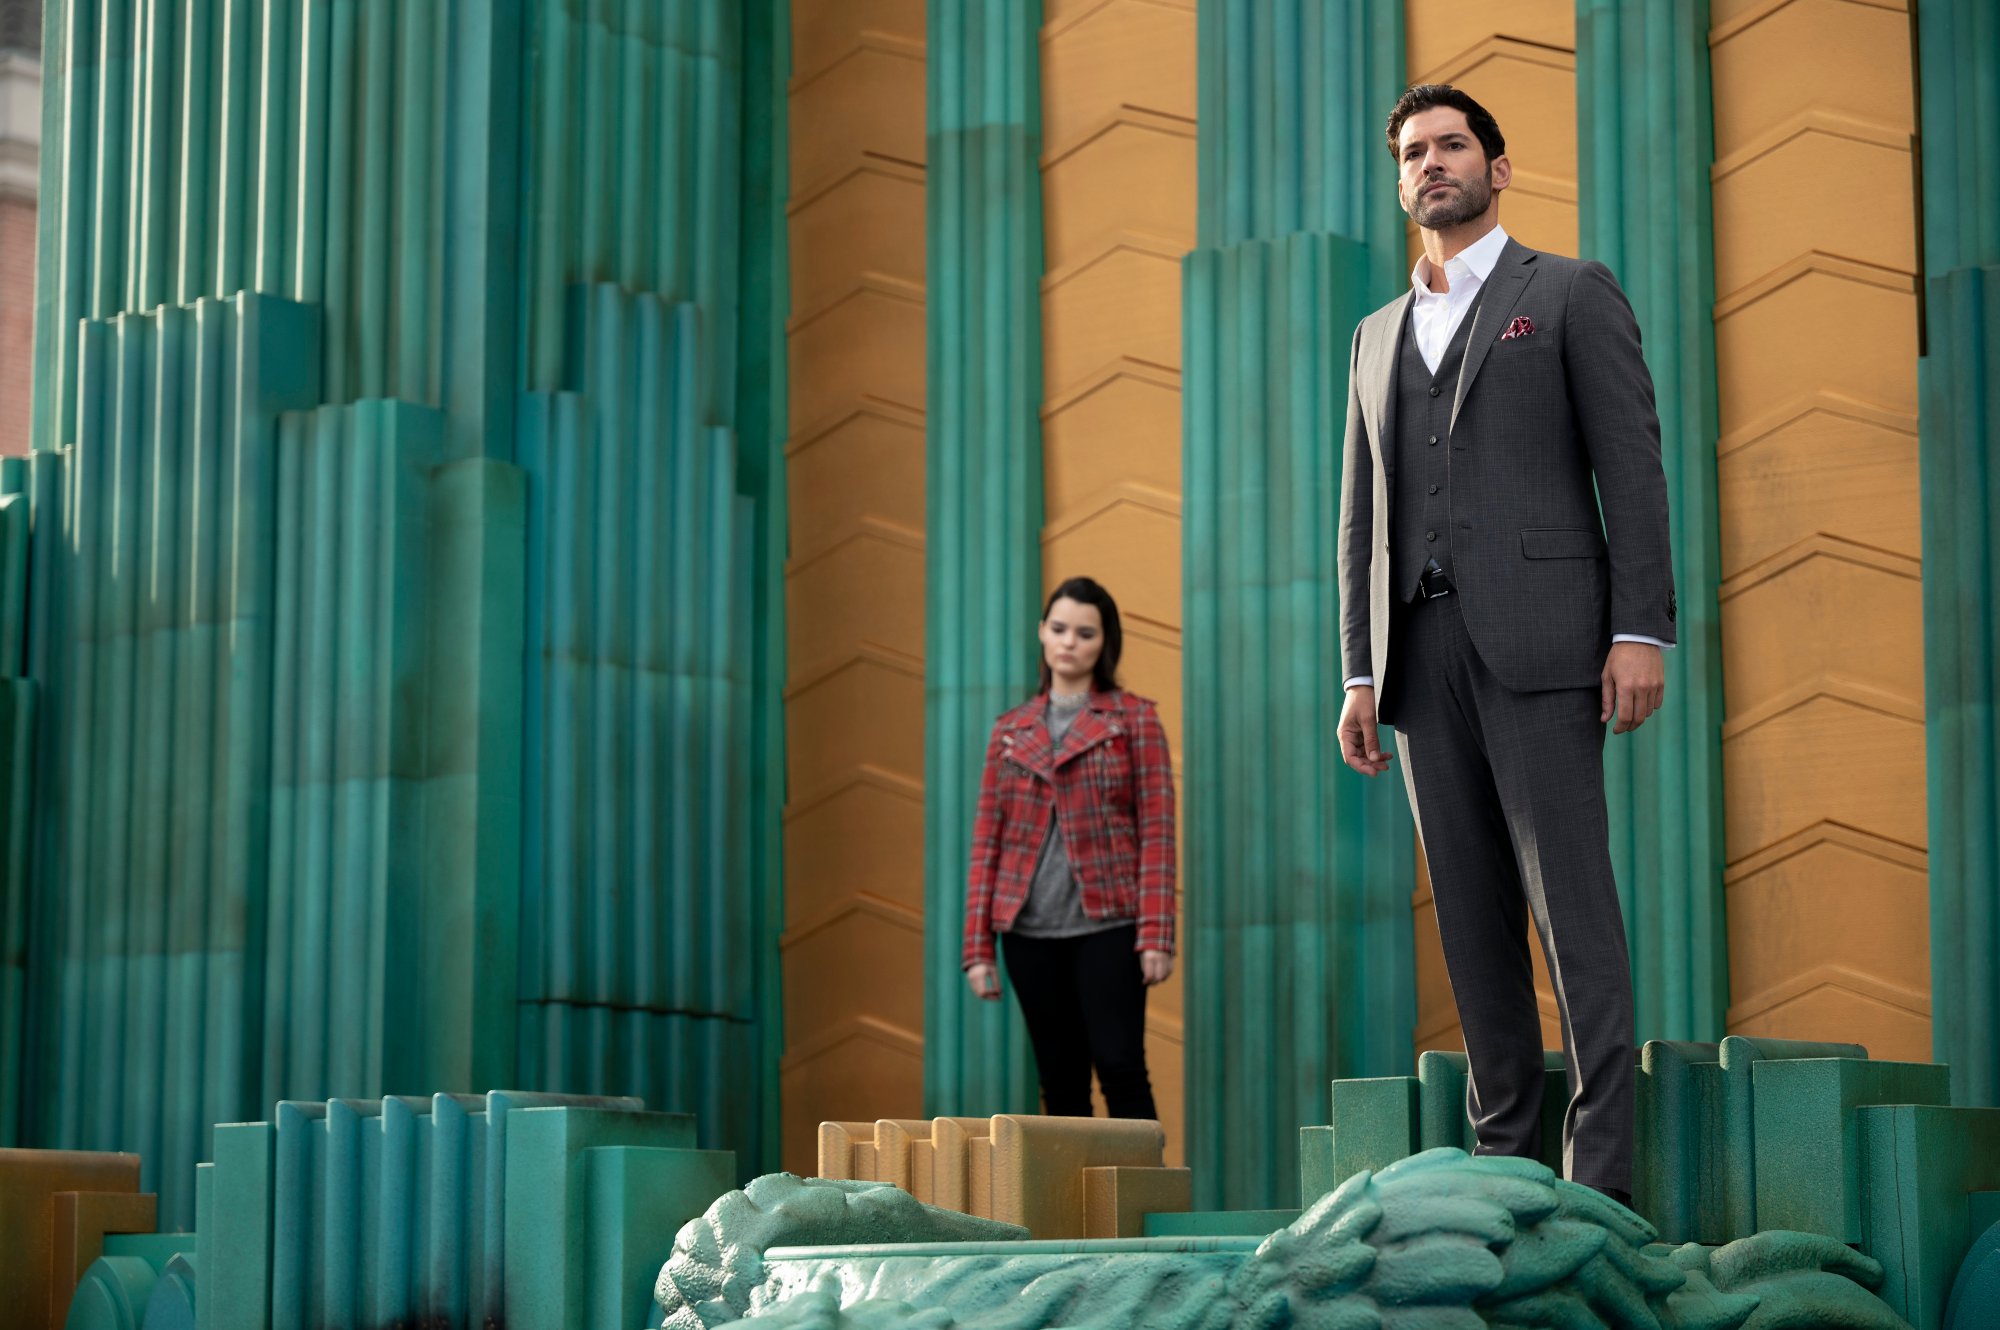 Tom Ellis and Brianna Hildebrand in 'Lucifer' Season 6. They're standing on a green and yellow surface and looking out at something.